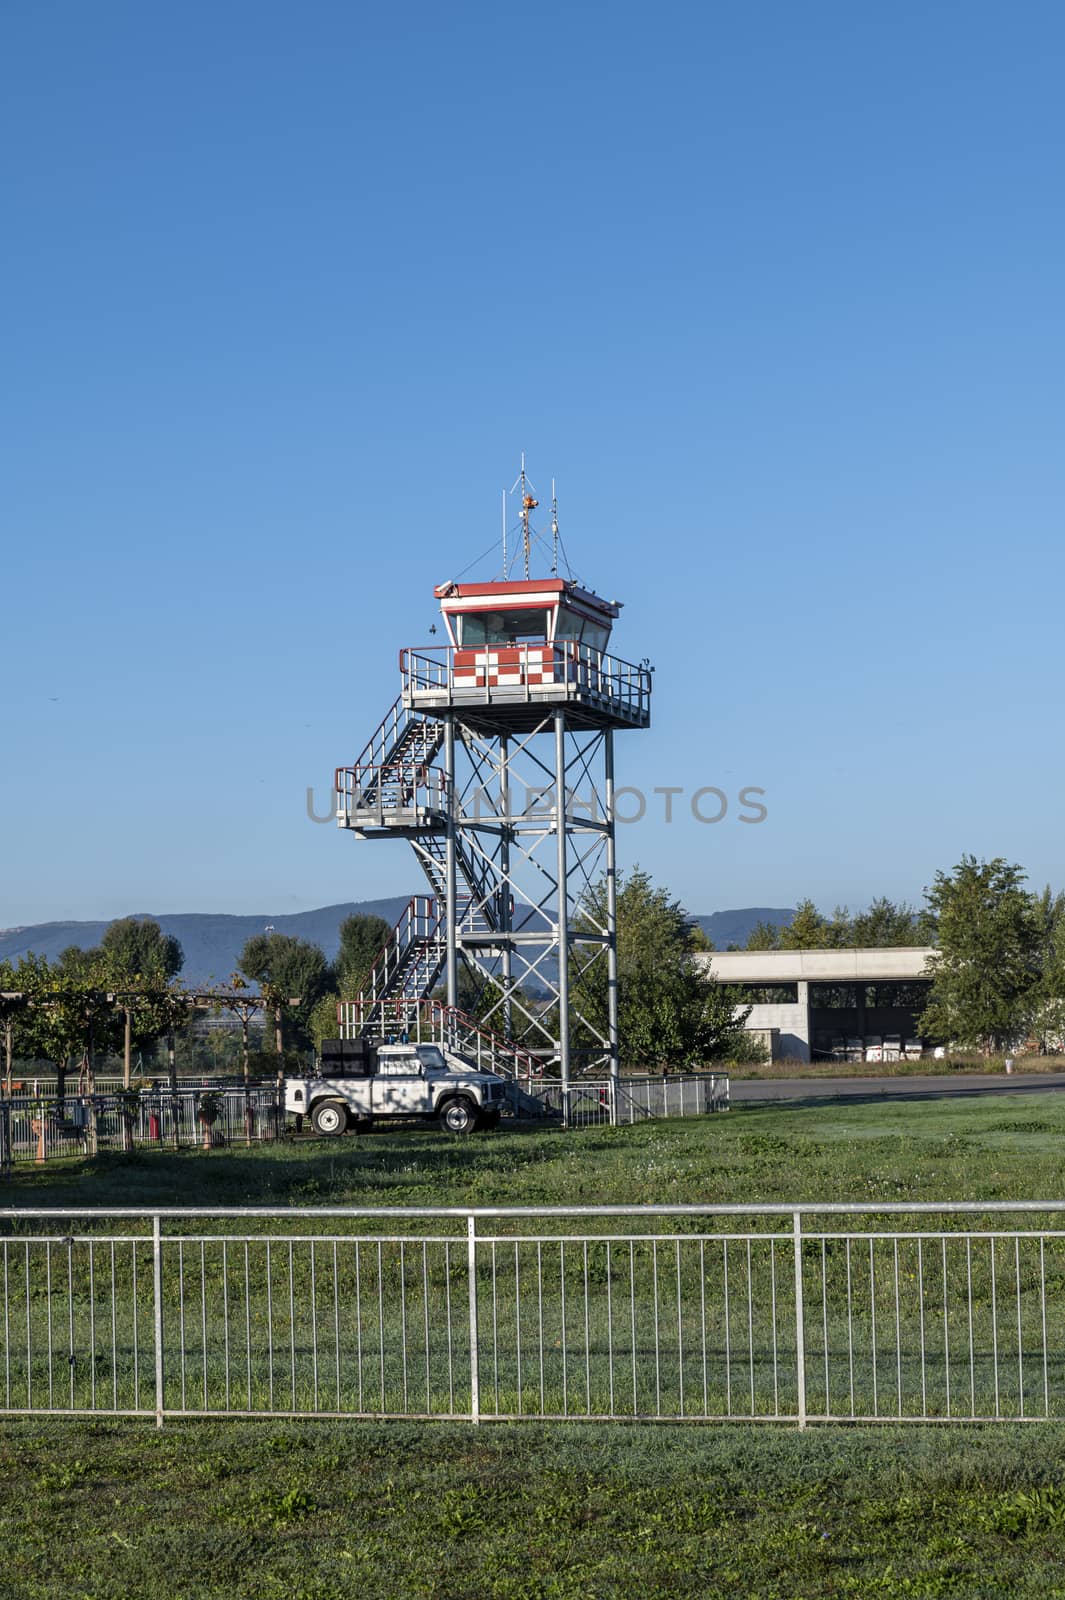 watchtower of a super light aircraft airport by carfedeph